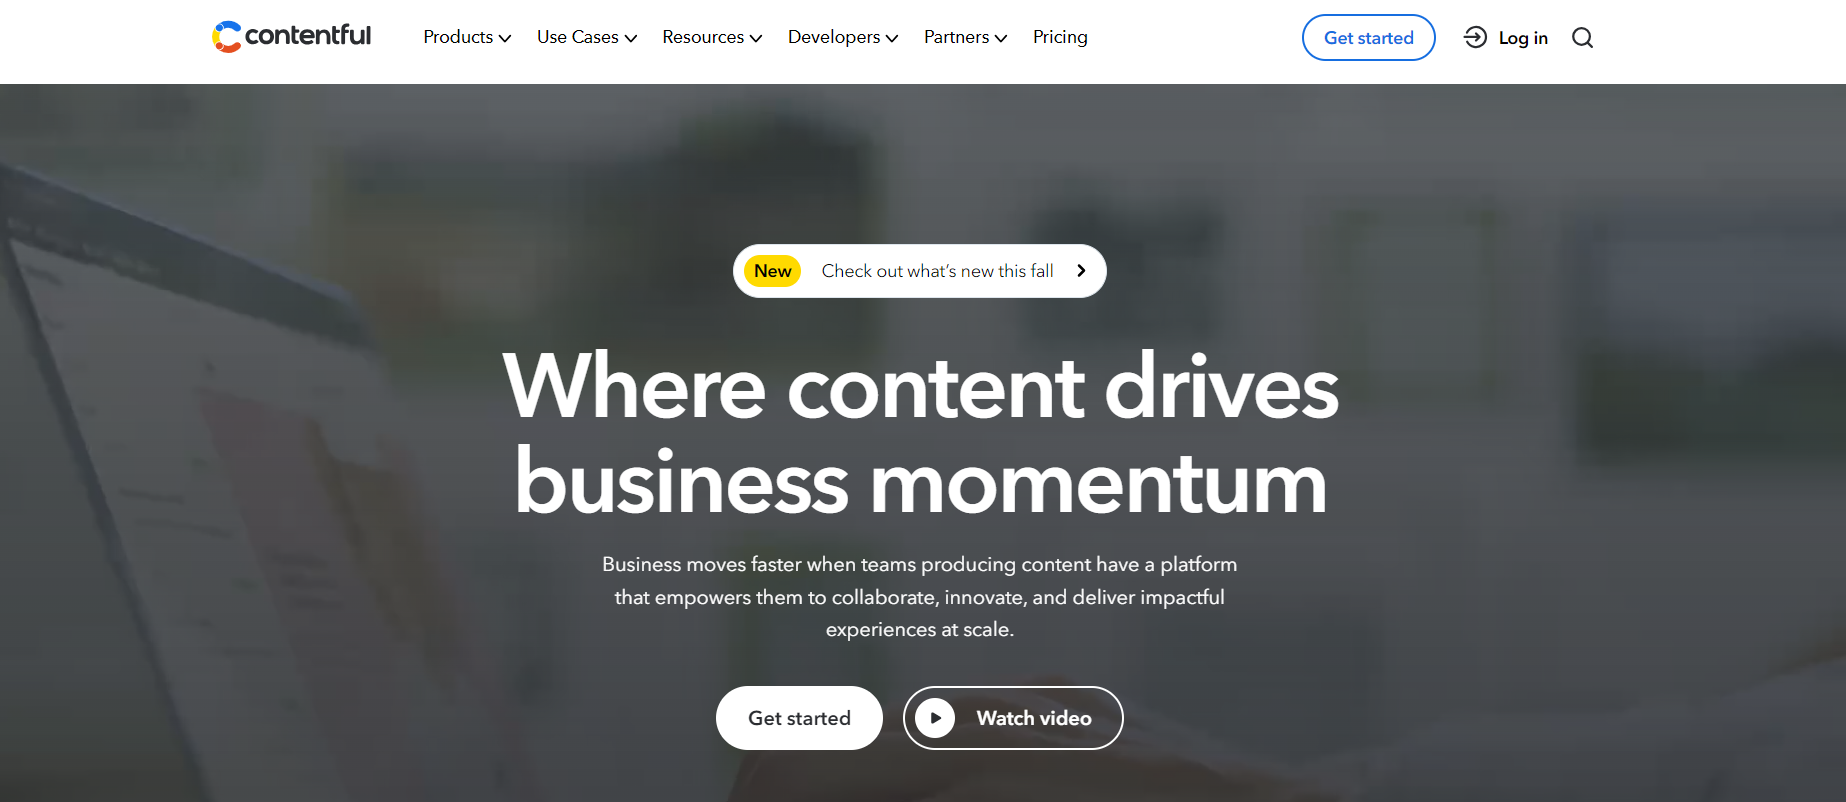 10 Best Content Management Systems (CMS): Which One to Choose 10 best cms contentful